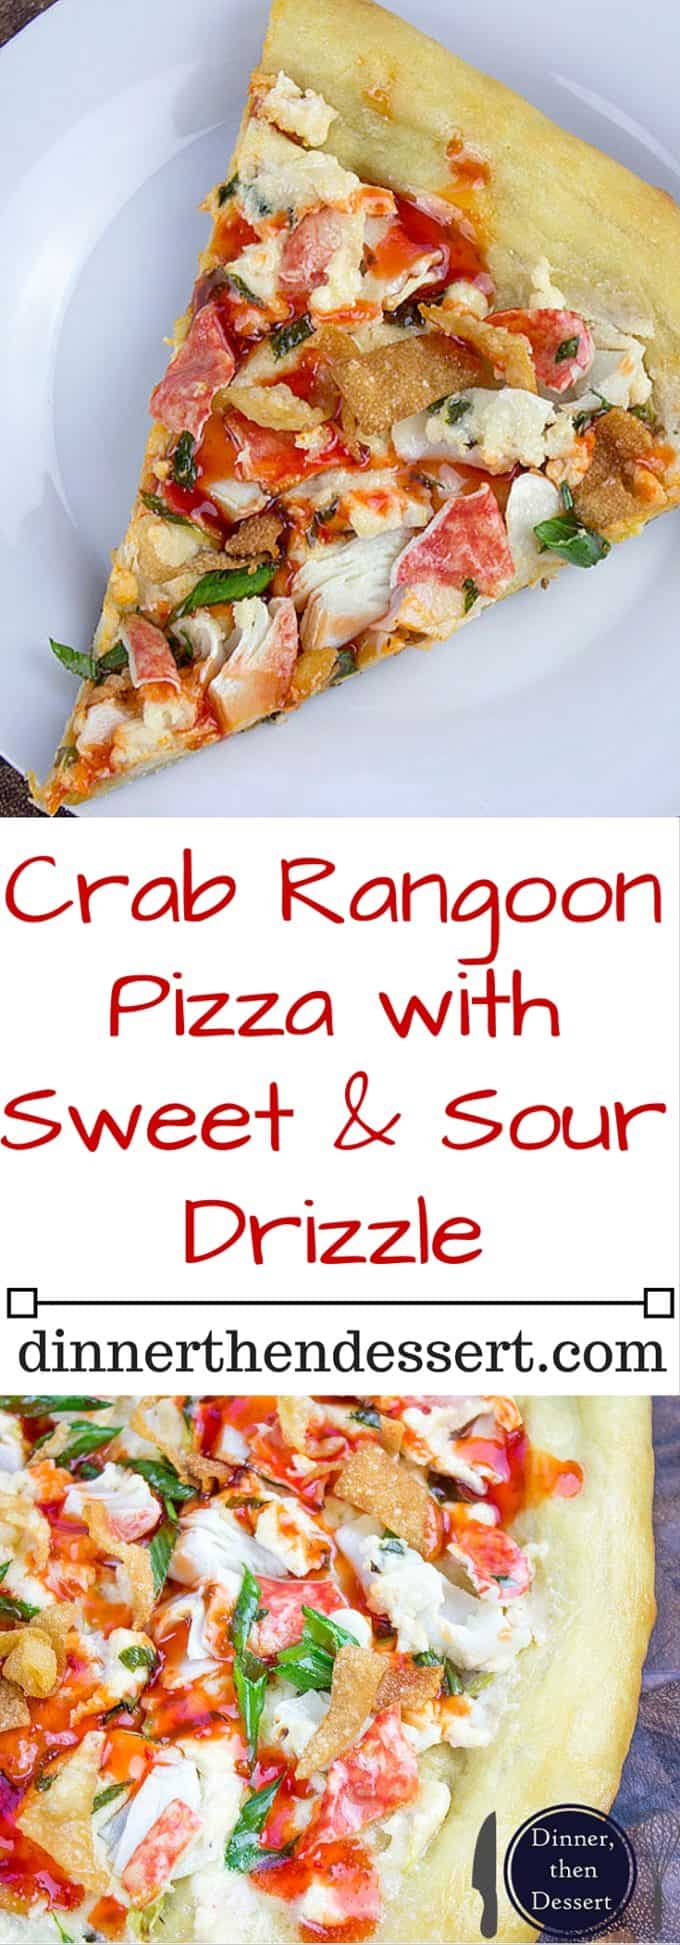 This Crab Wonton Pizza with Sweet & Sour Drizzle is the answer to "Pizza or Chinese?" and in the best possible way because you can make it at home! Crunchy, creamy, sweet and sour you'll find yourselves fighting over the last slice!